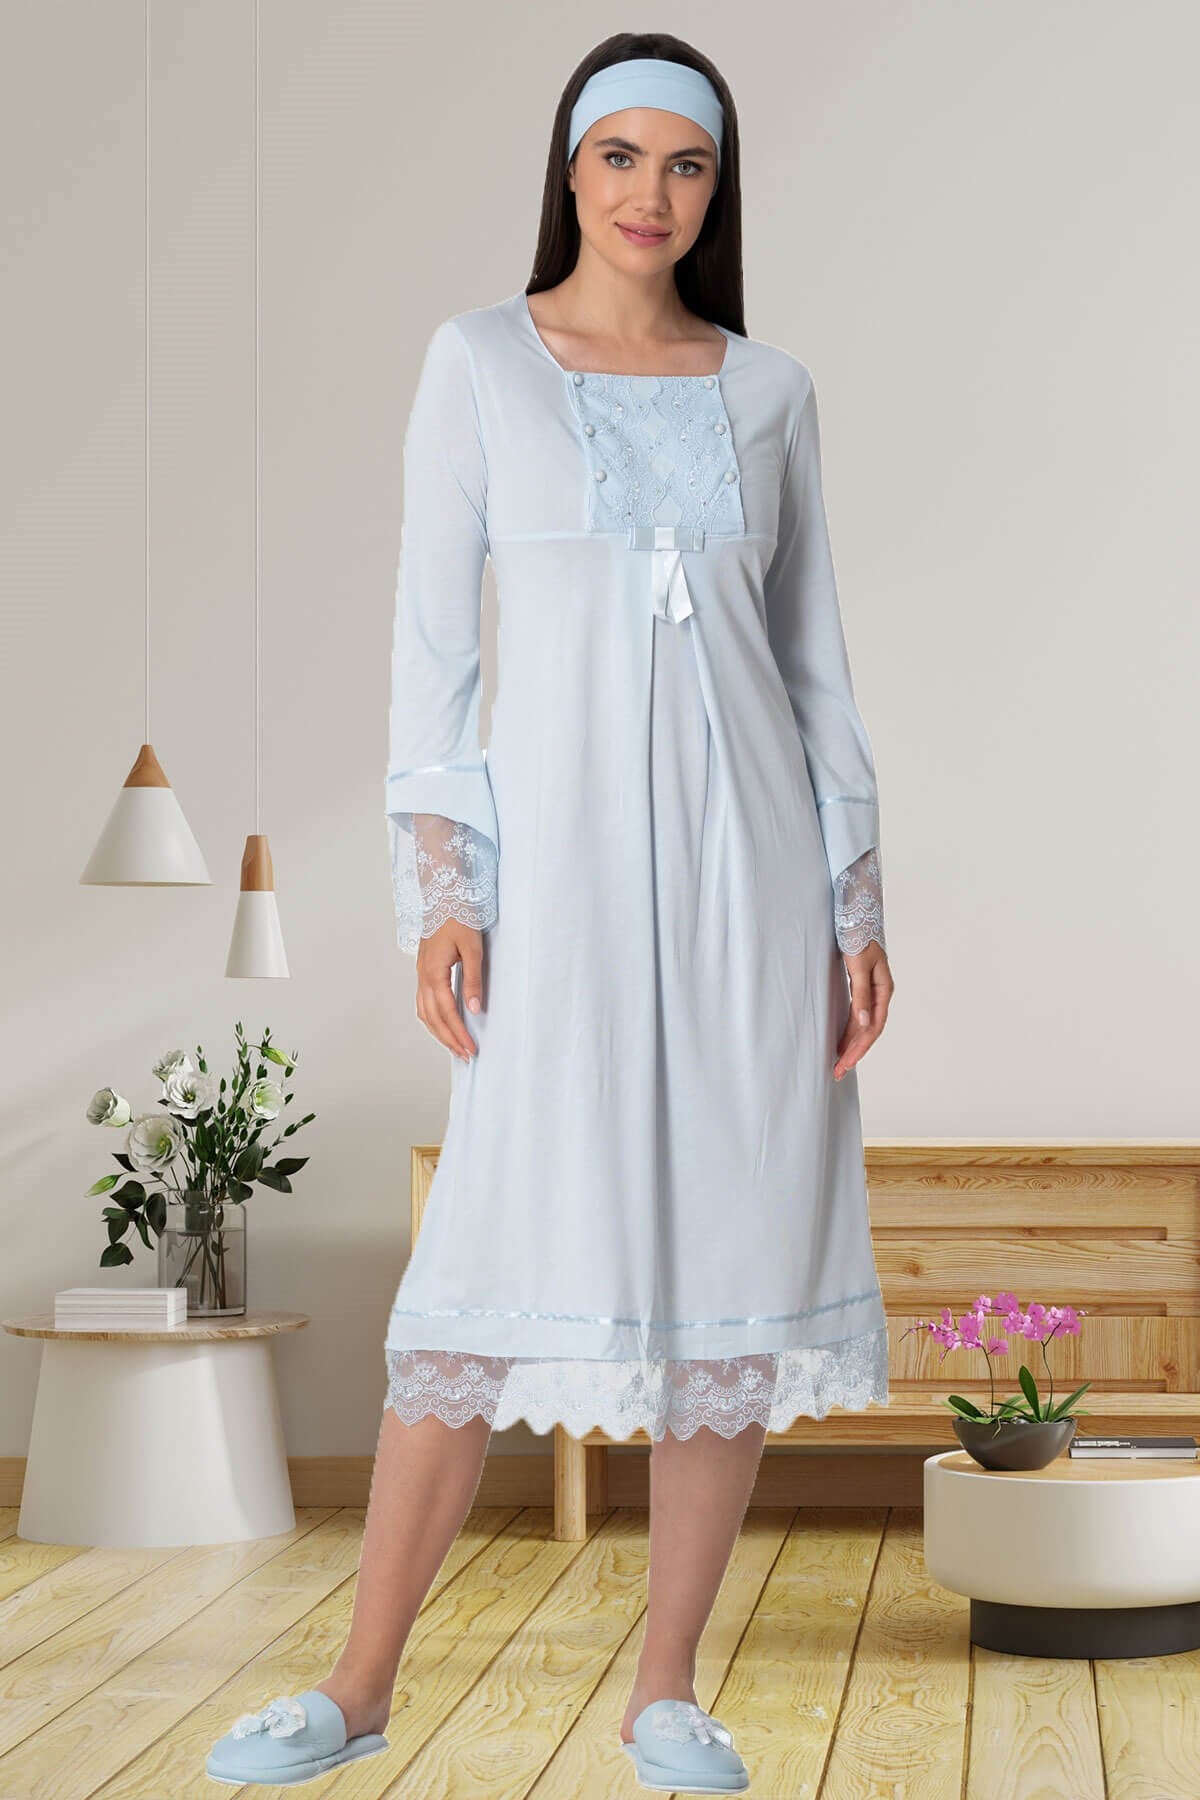 Shopymommy 5209 Skirt Lace Maternity & Nursing Nightgown Blue